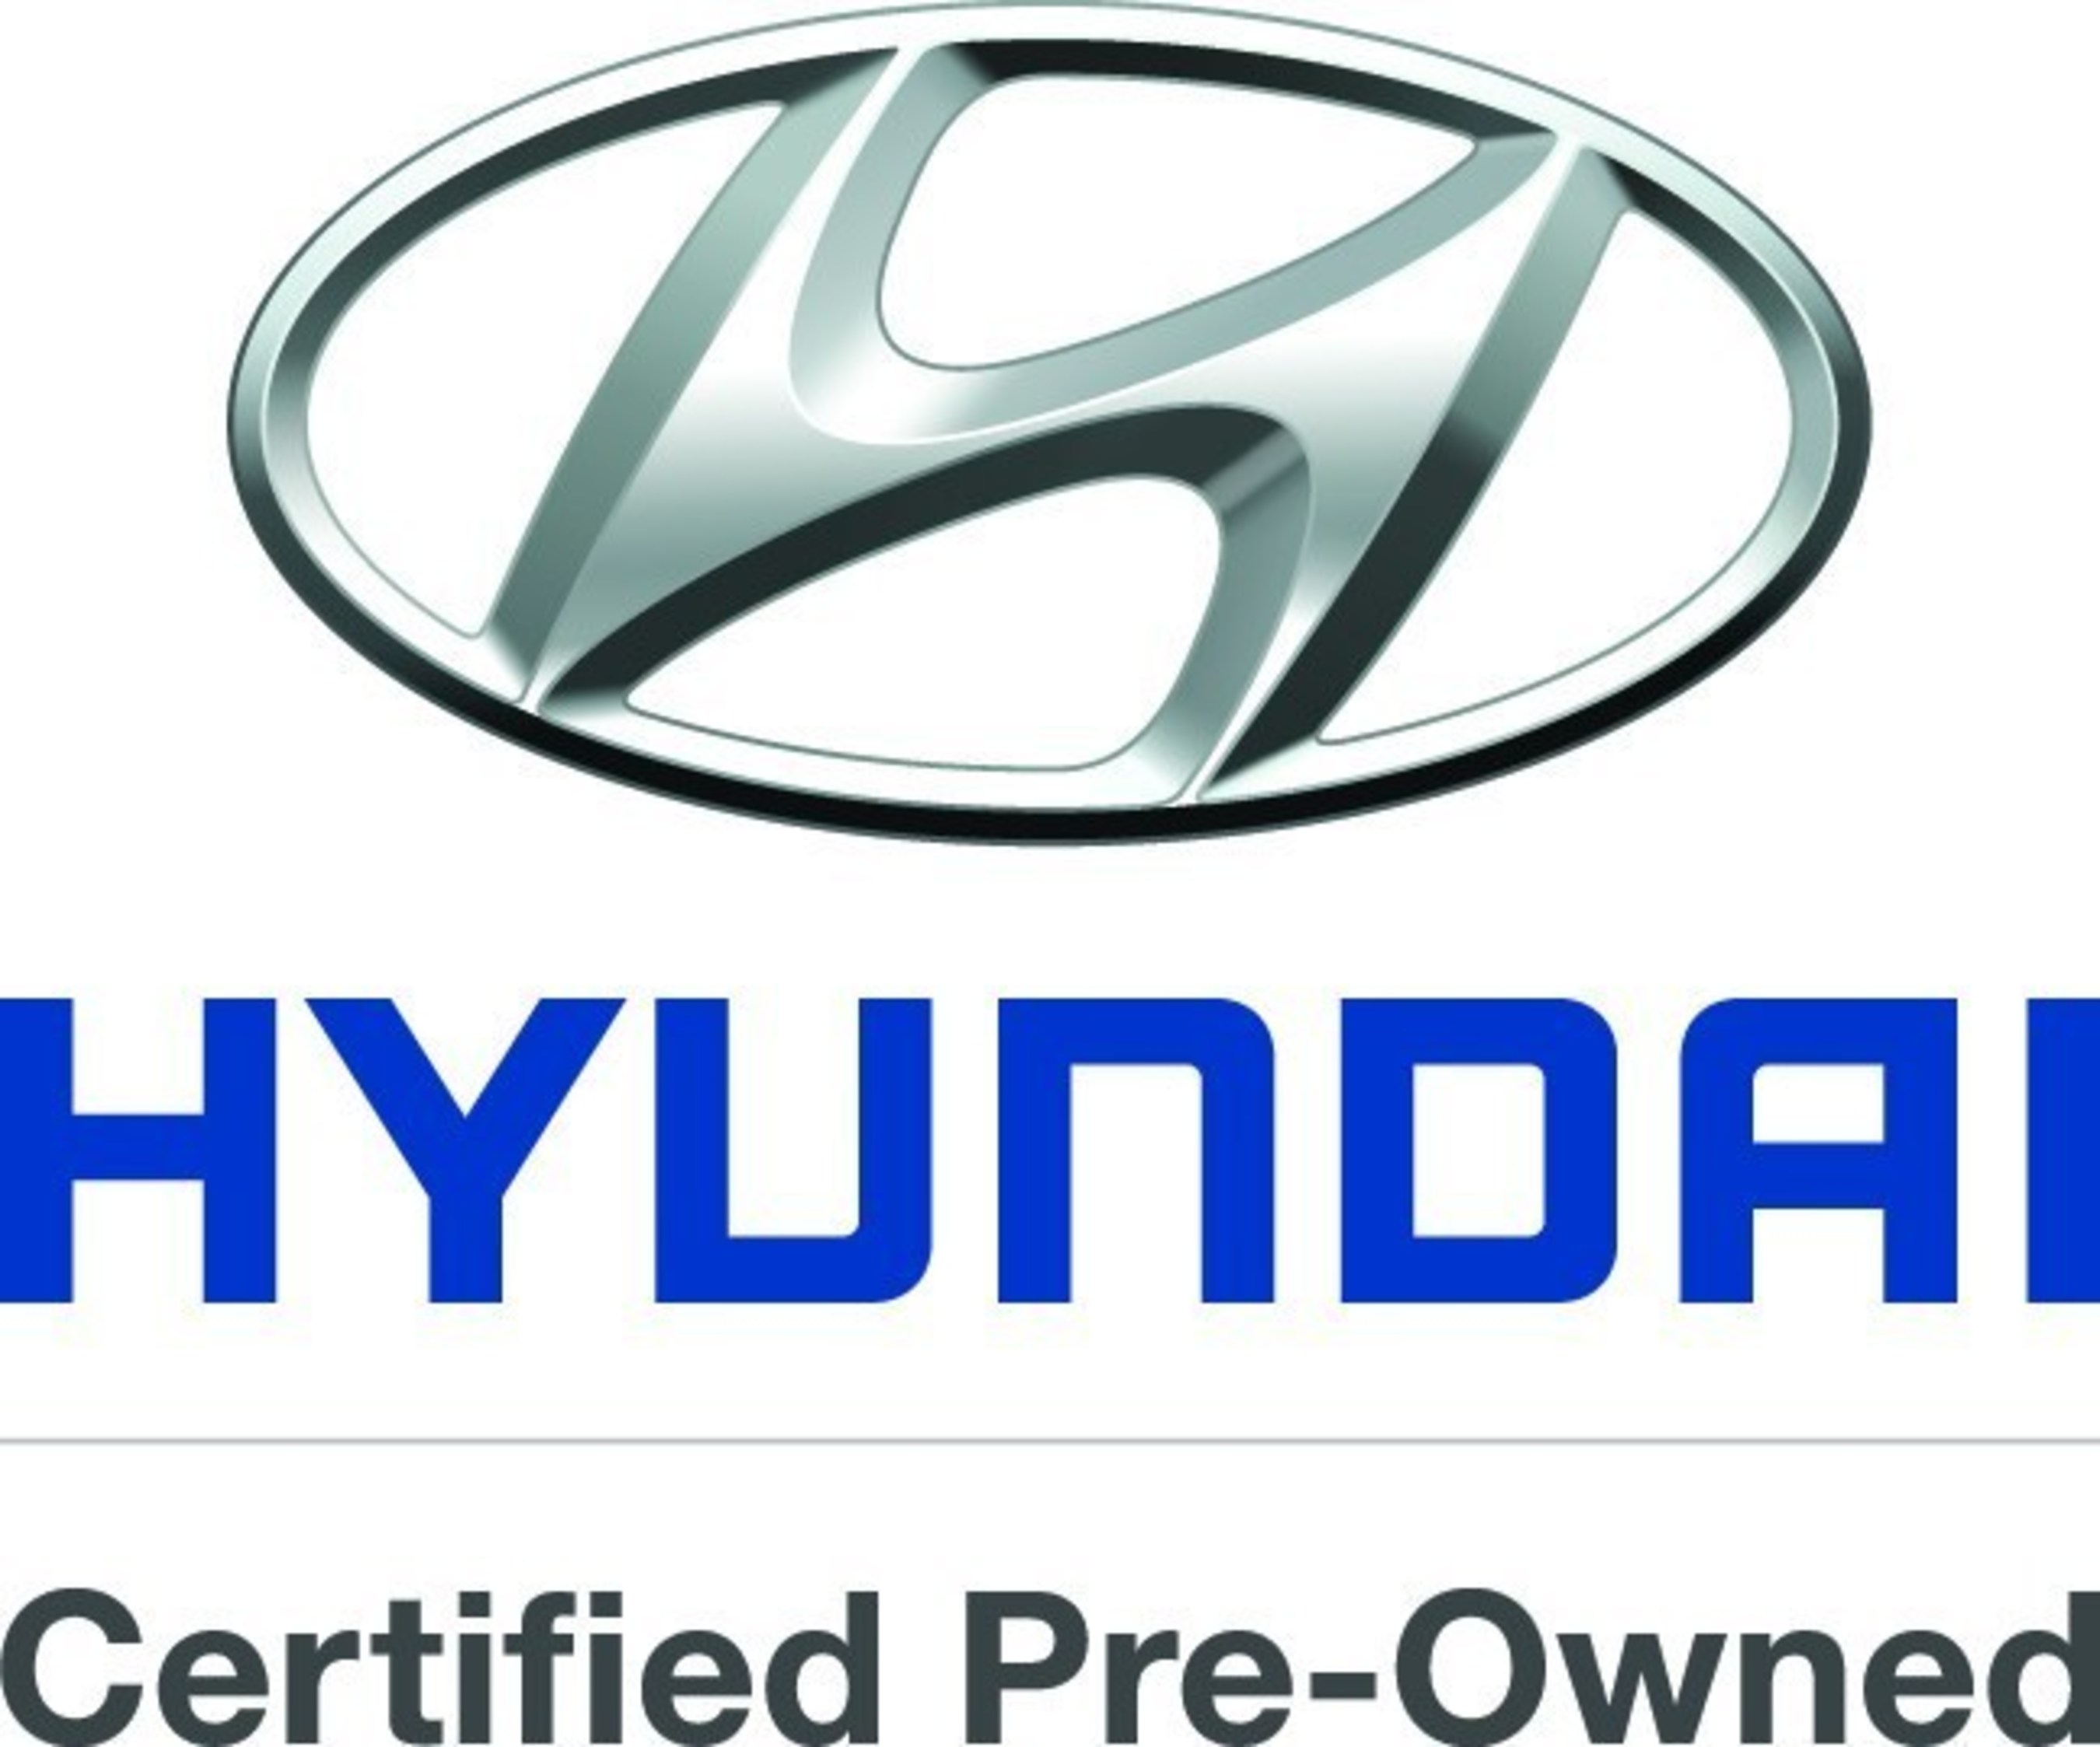 Hyundai Wins IntelliChoice Certified Pre-Owned (CPO) Award For Fourth-Consecutive Year